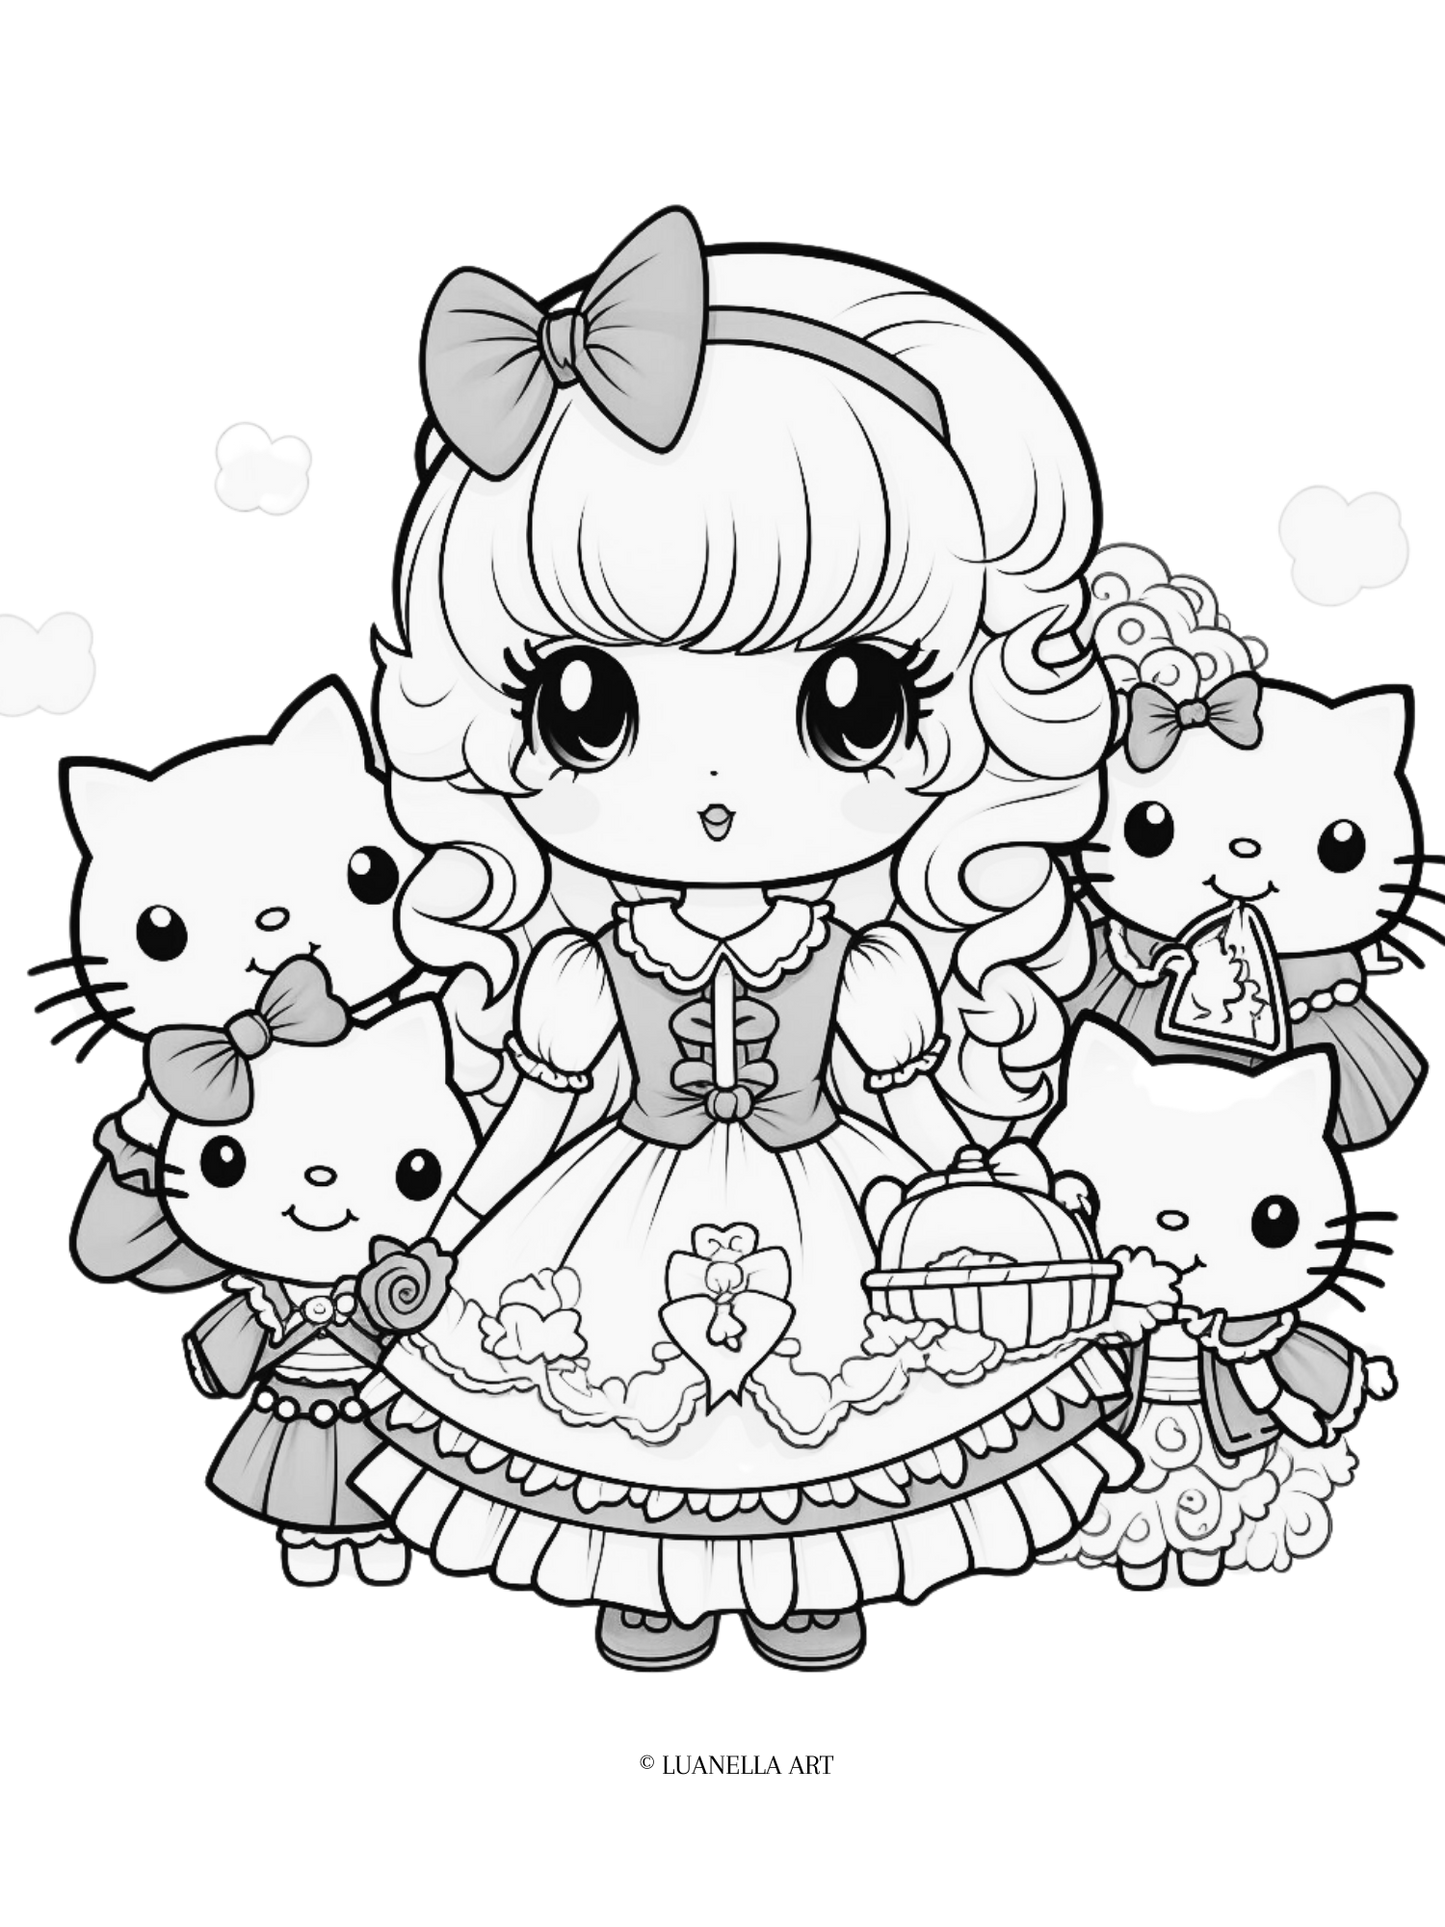 My Melody, Hello Kitty, Mimmy, Sanrio friends | Coloring Page | Instant Digital Download